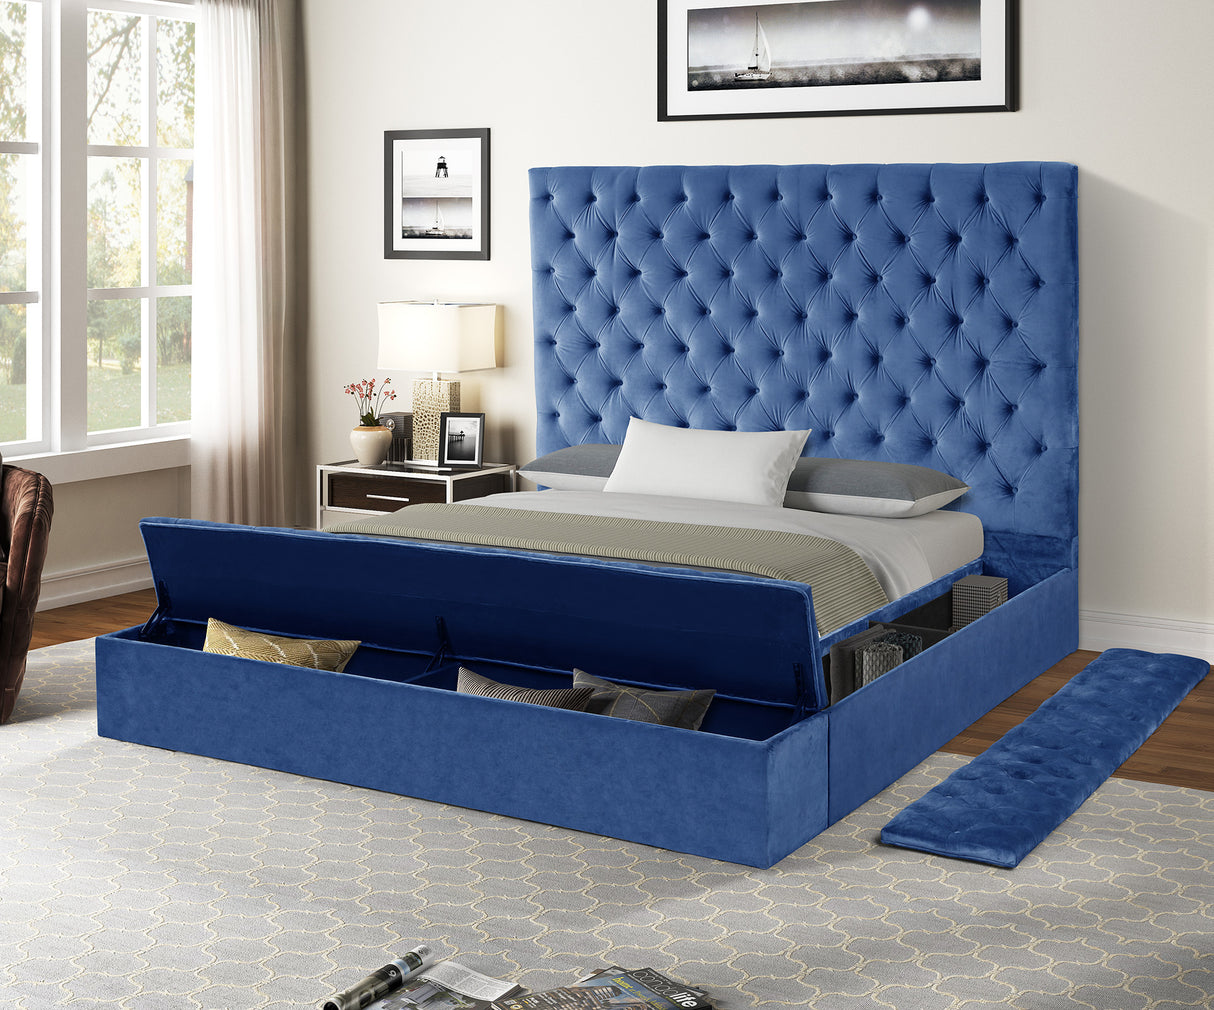 Nora Queen Size Tufted Upholstery Storage Bed made with Wood in Blue - Home Elegance USA